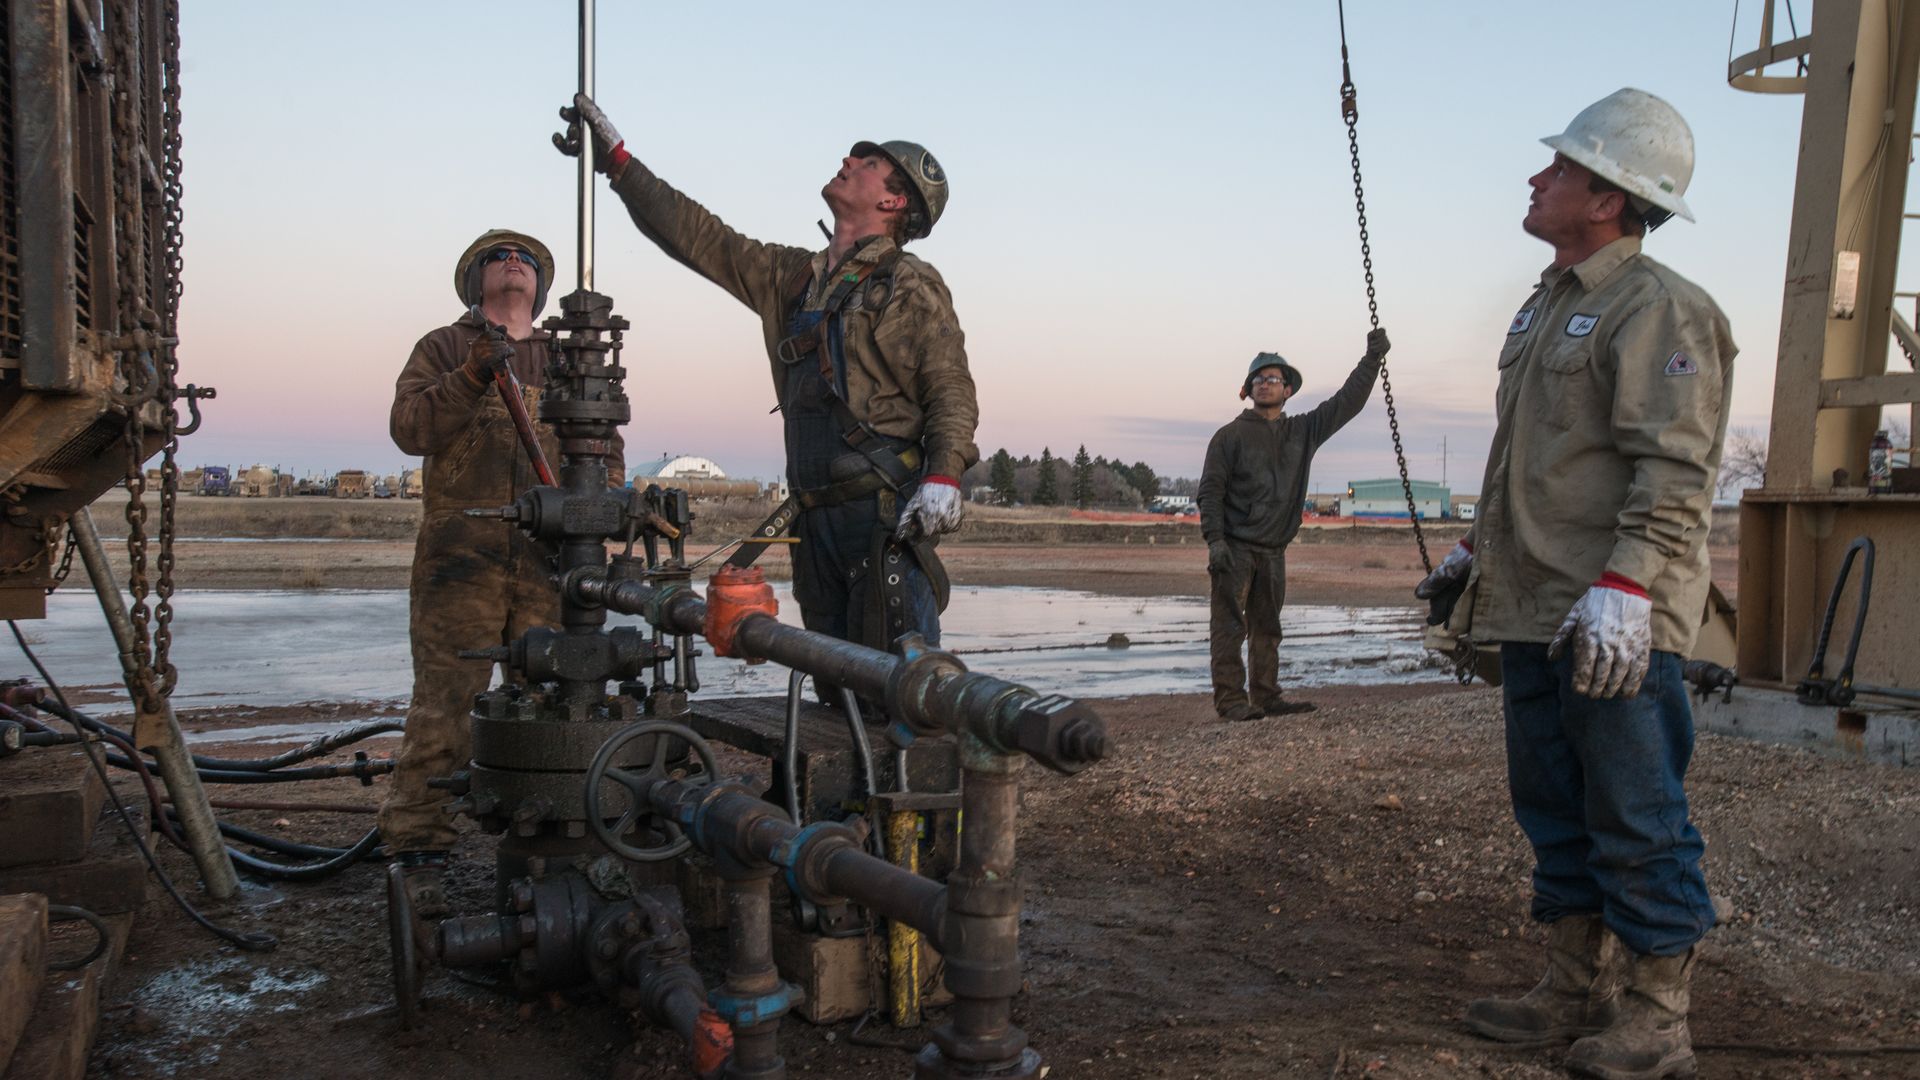 Three oil workers at a fracking site in North Dakota